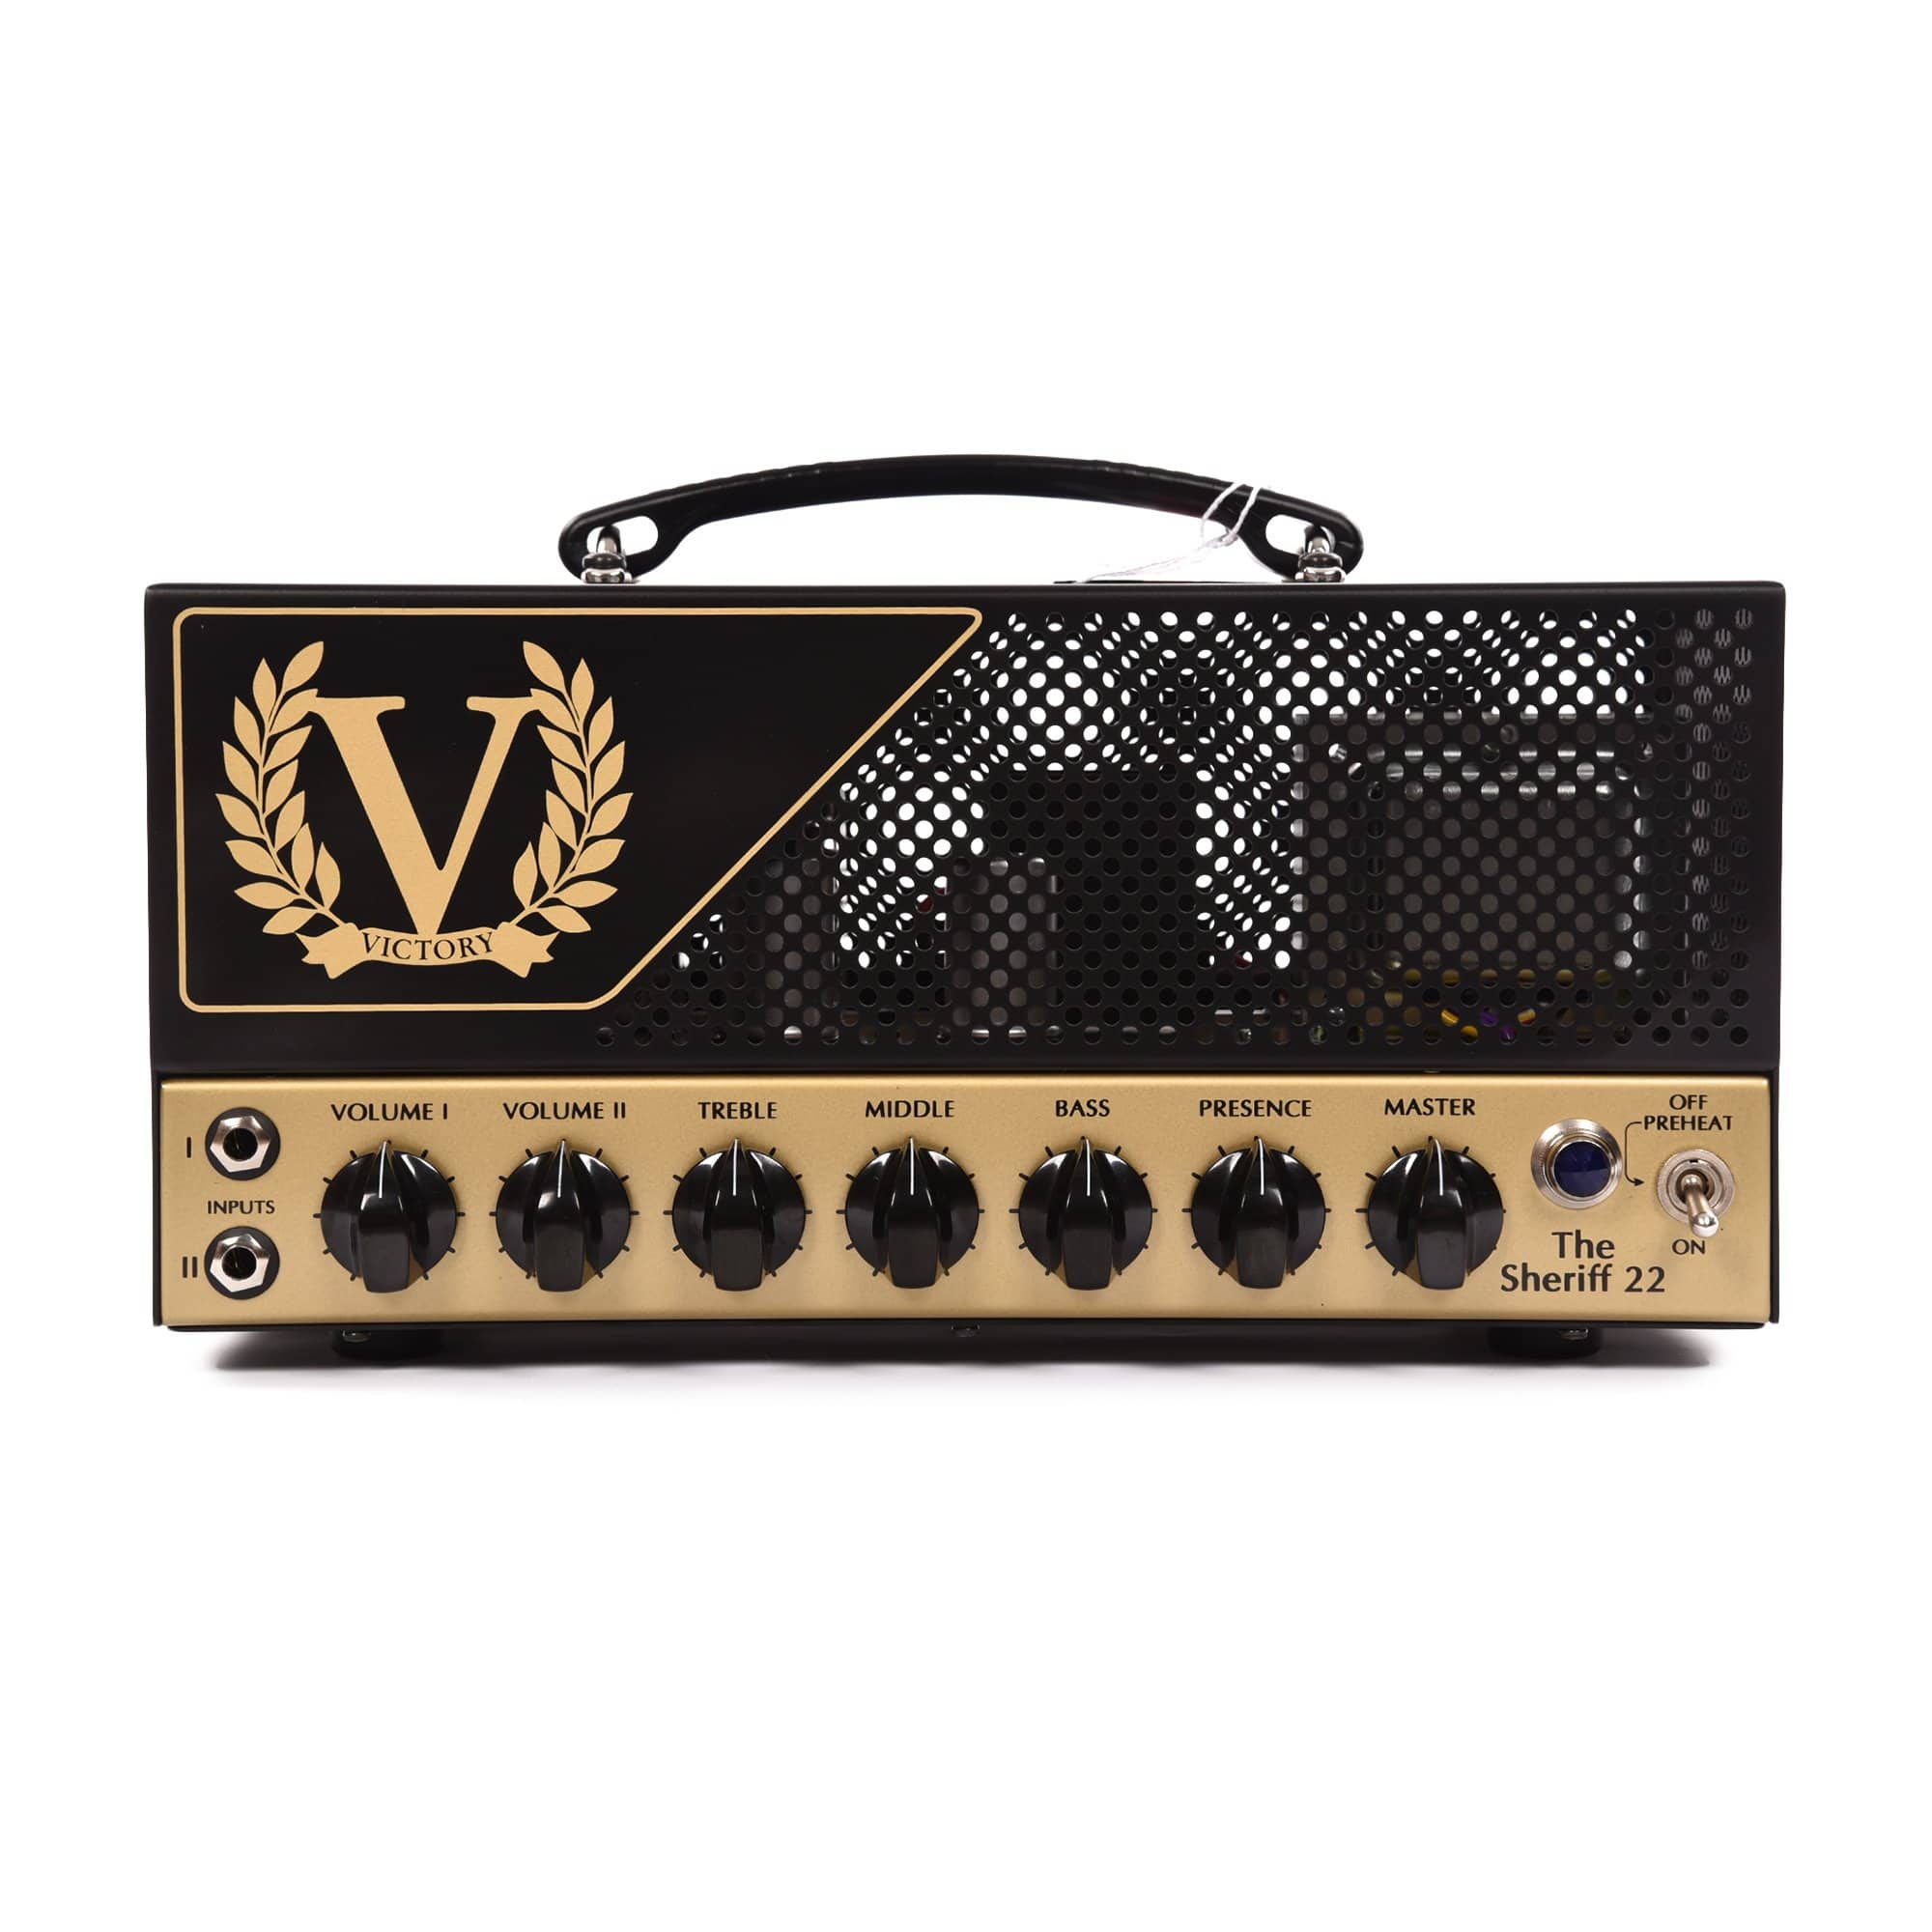 Victory The Sheriff 22 Compact Head Amps / Guitar Heads